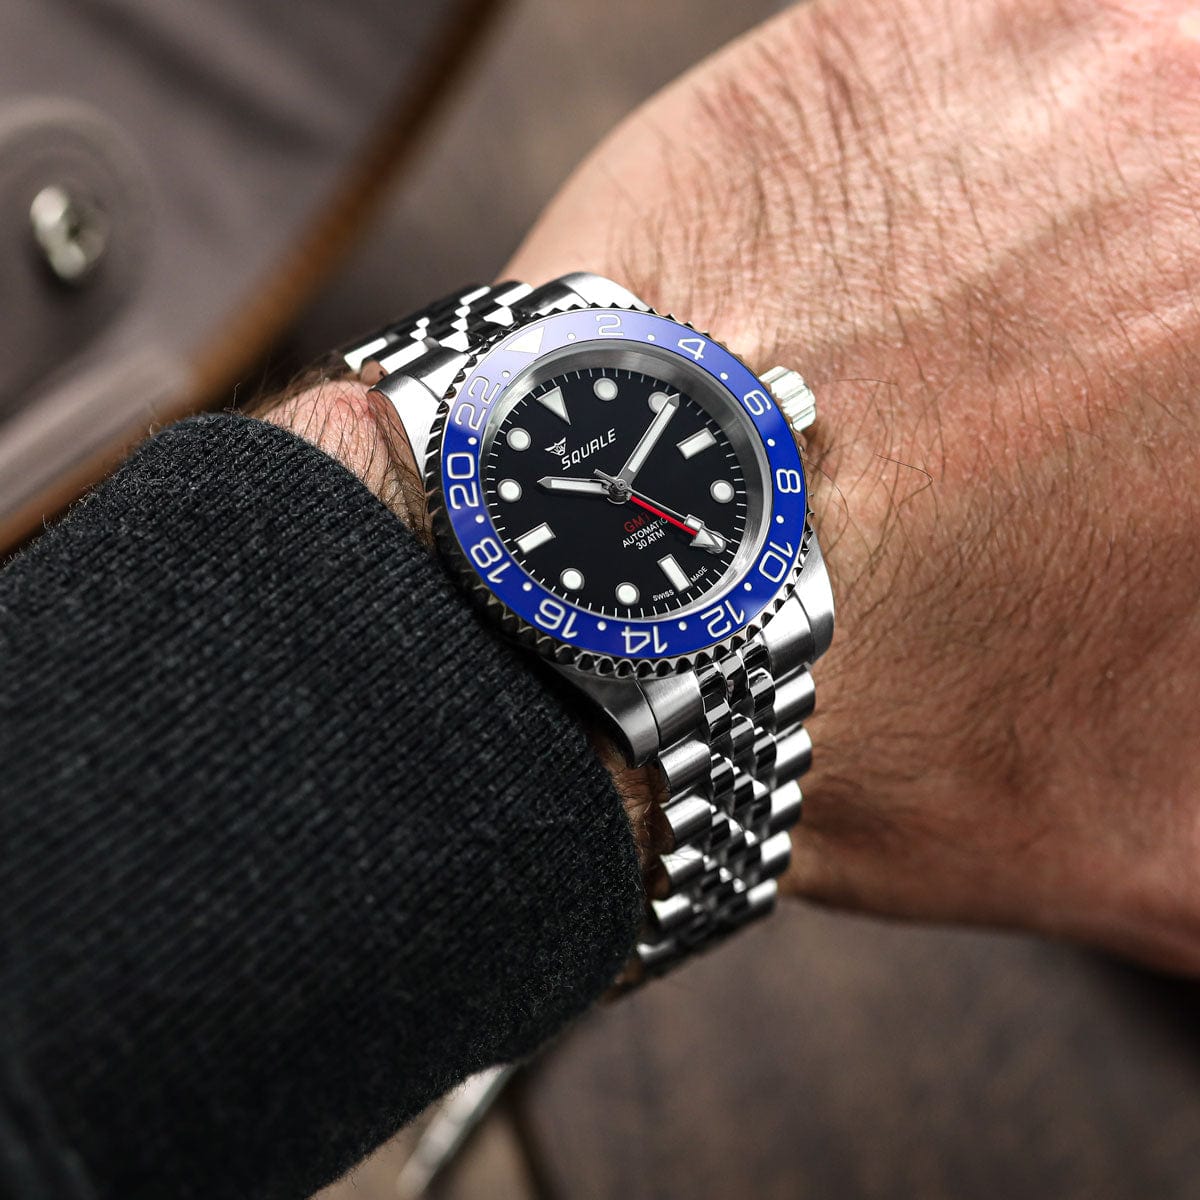 Squale 30 ATMOS 1545 GMT Mechanical Watch - Black / Blue - NEARLY NEW